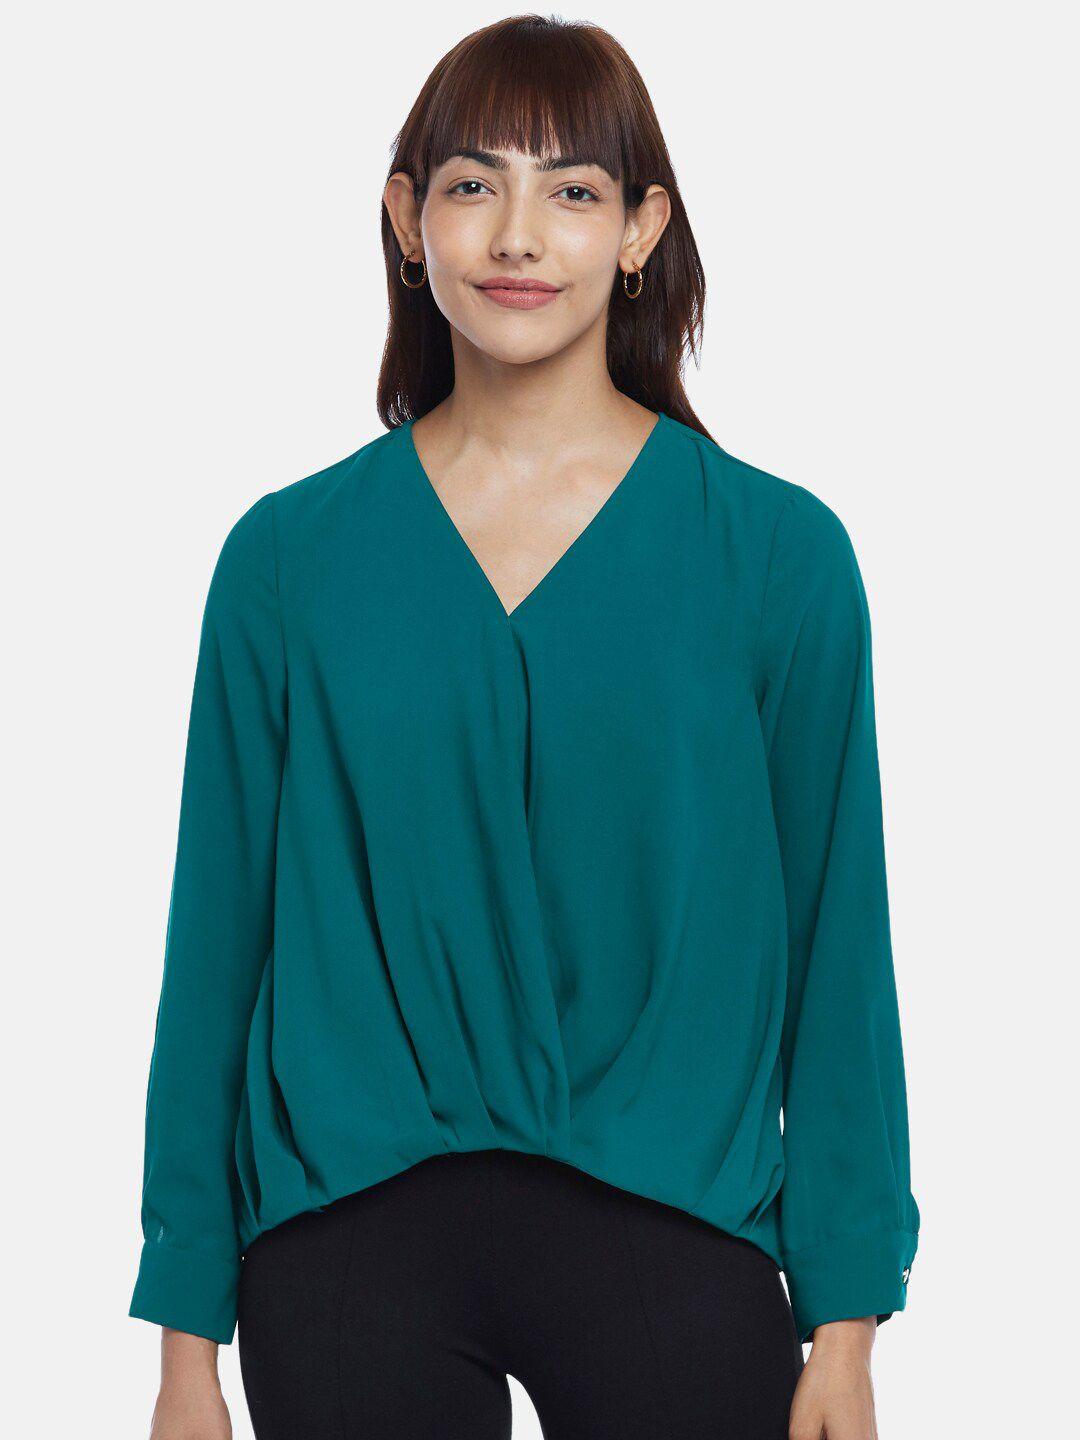 annabelle-by-pantaloons-women--teal-top